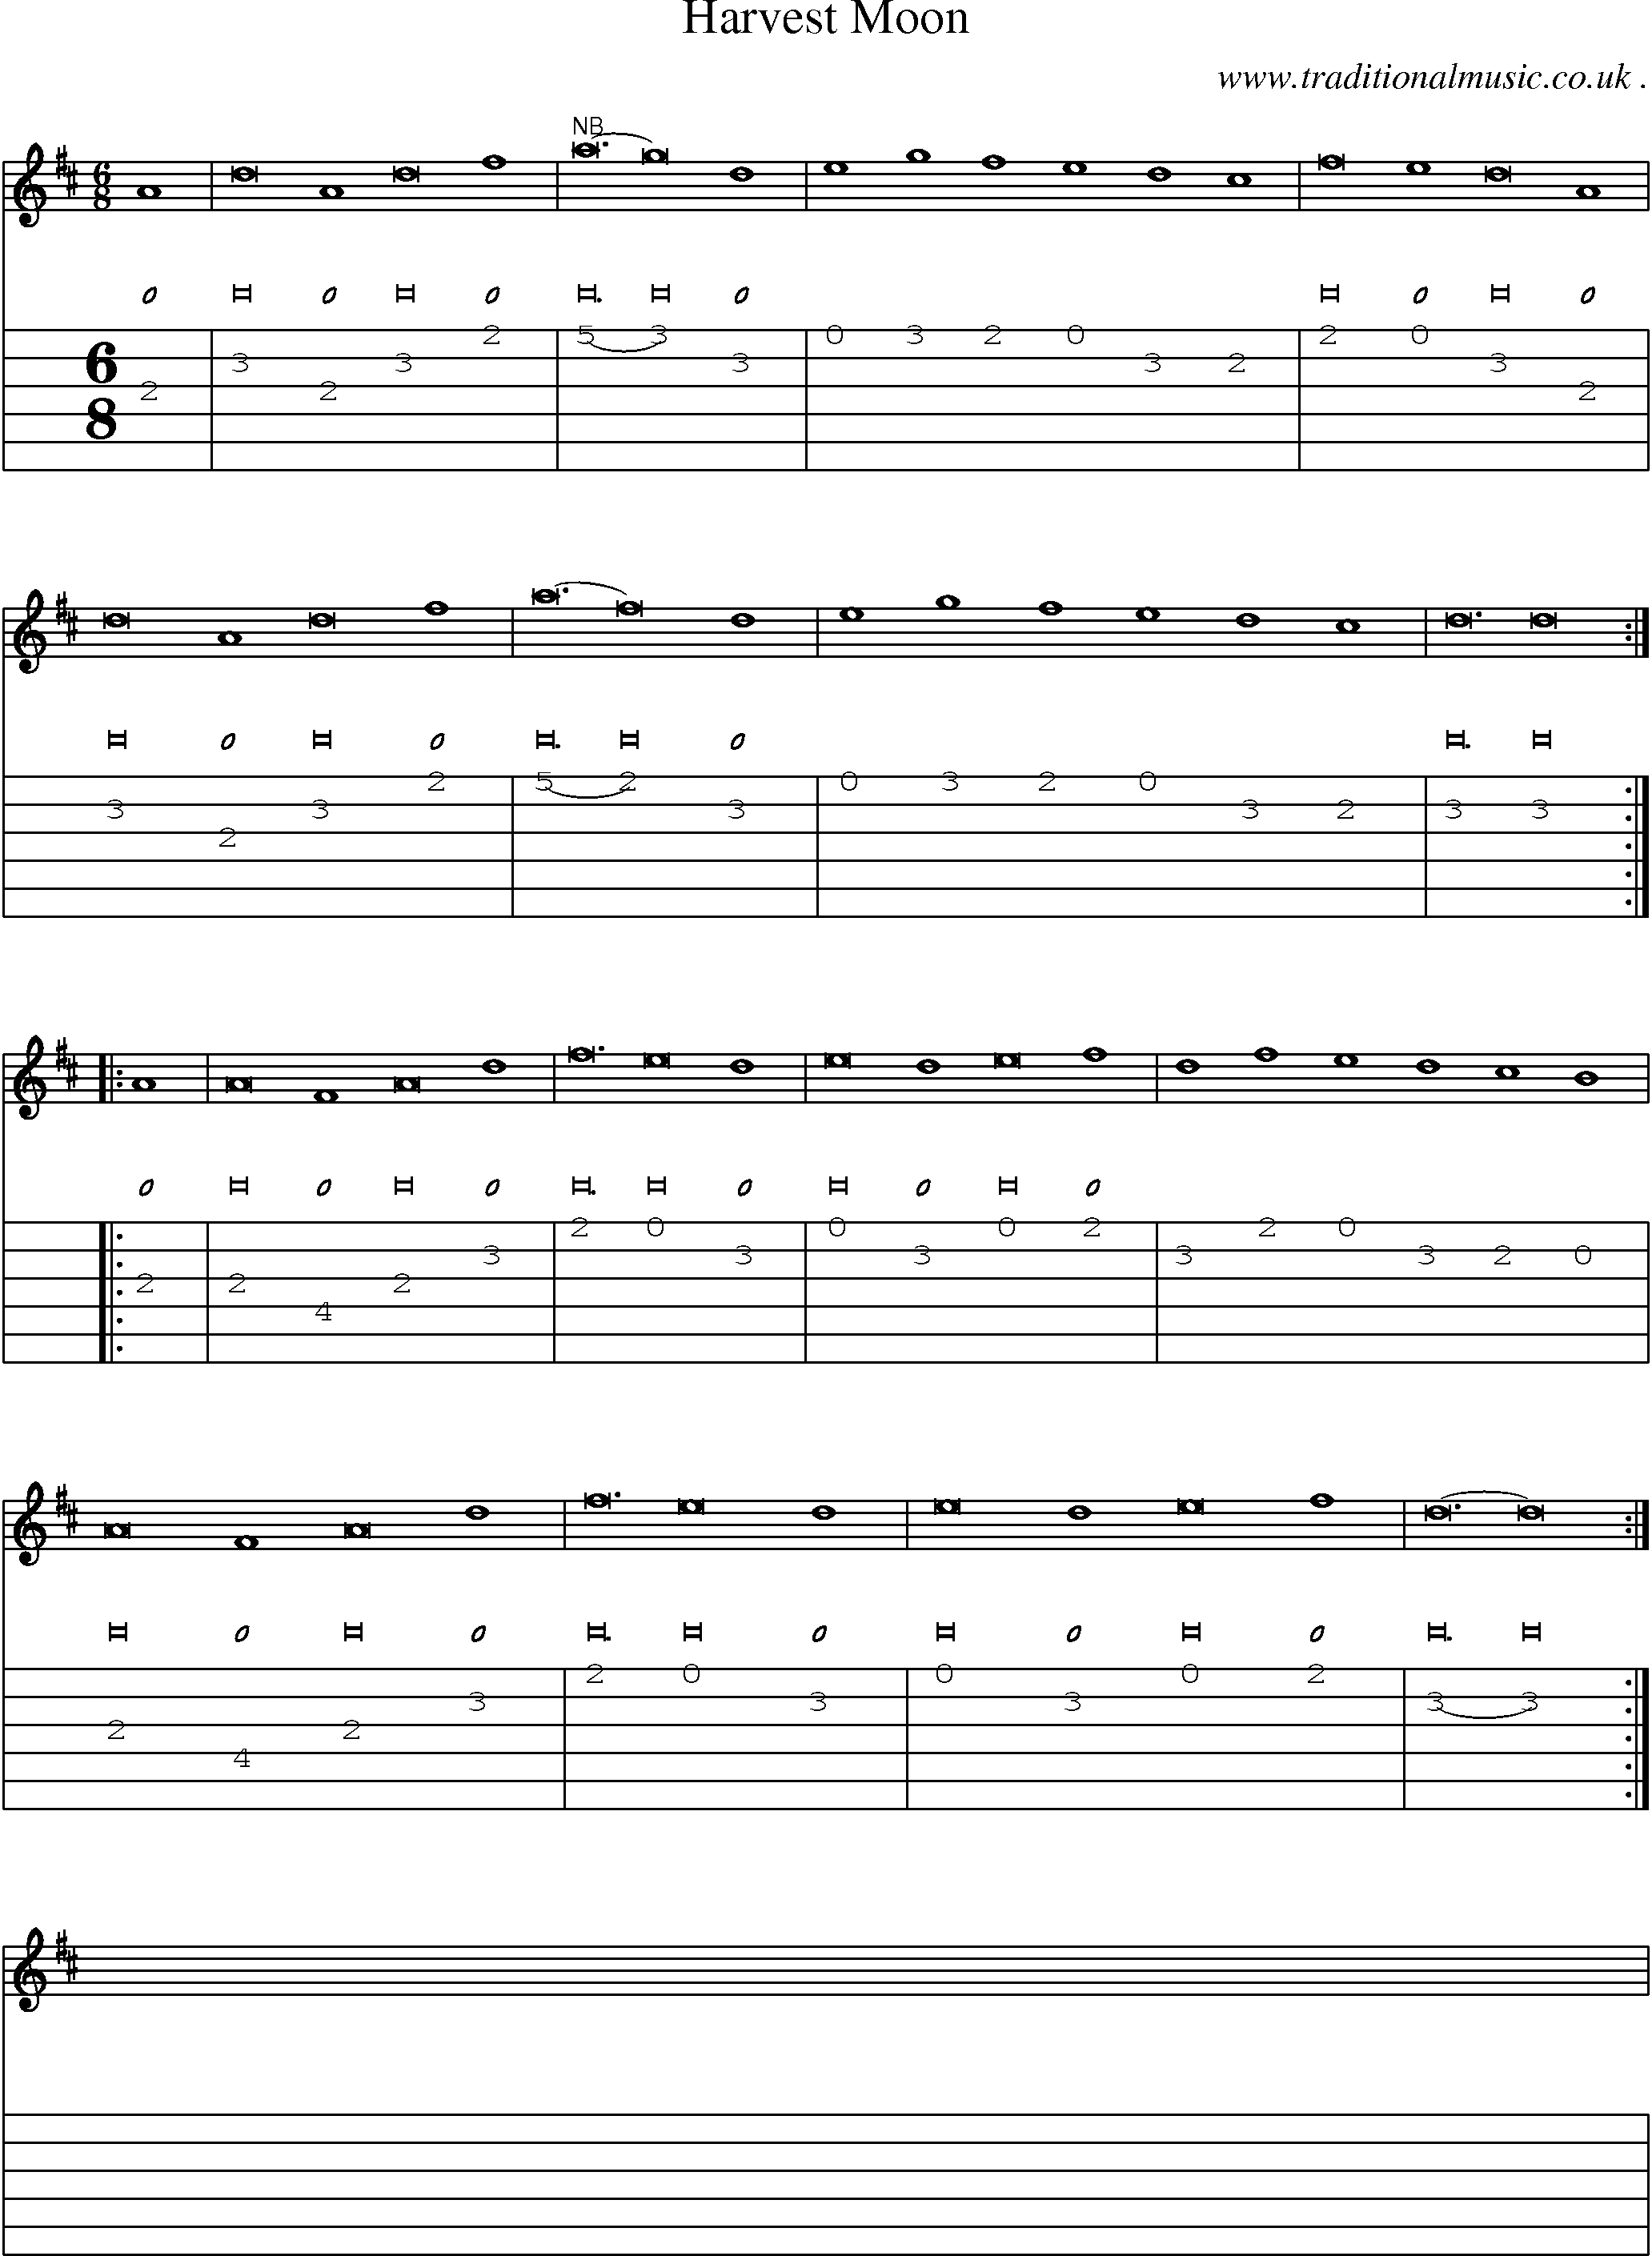 Sheet-Music and Guitar Tabs for Harvest Moon.